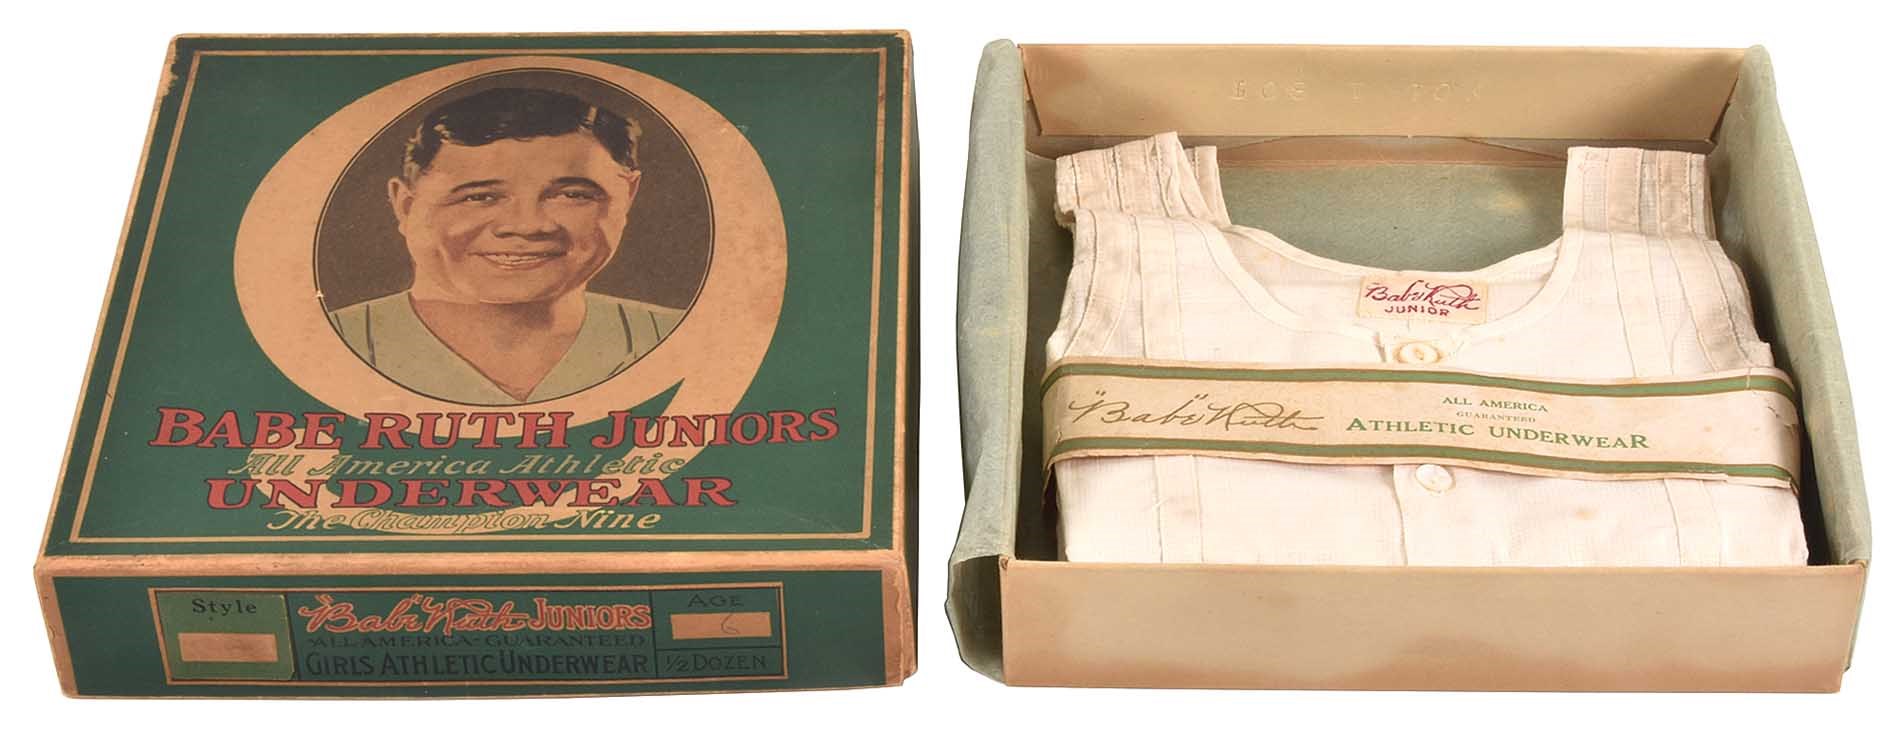 The Babe Ruth Underpants Box Forgery